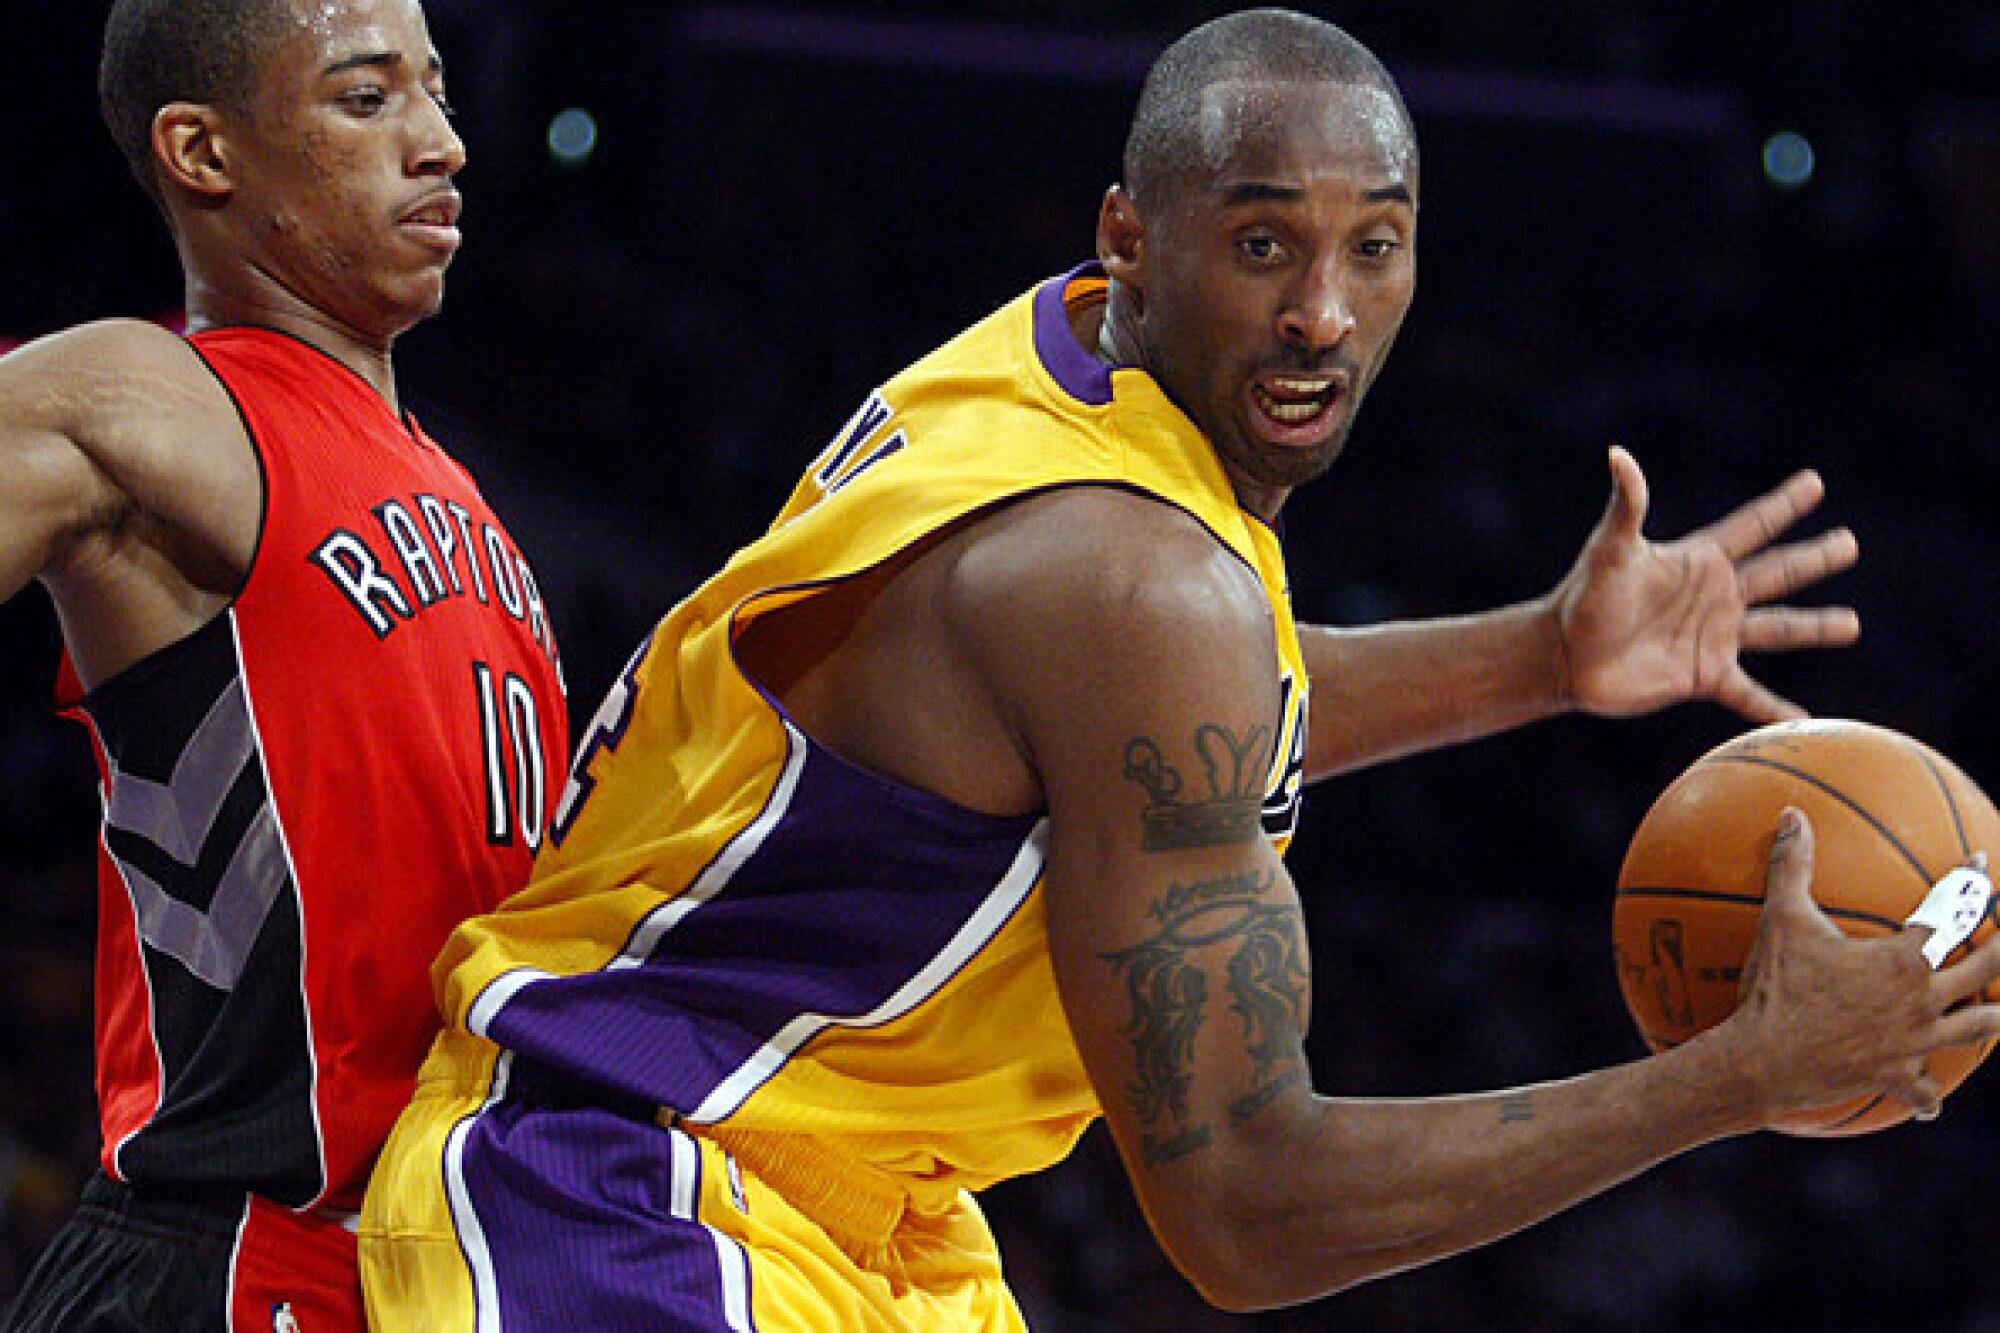 Lakers guard Kobe Bryant receives a pass while guarded by Raptors guard DeMar DeRozan.